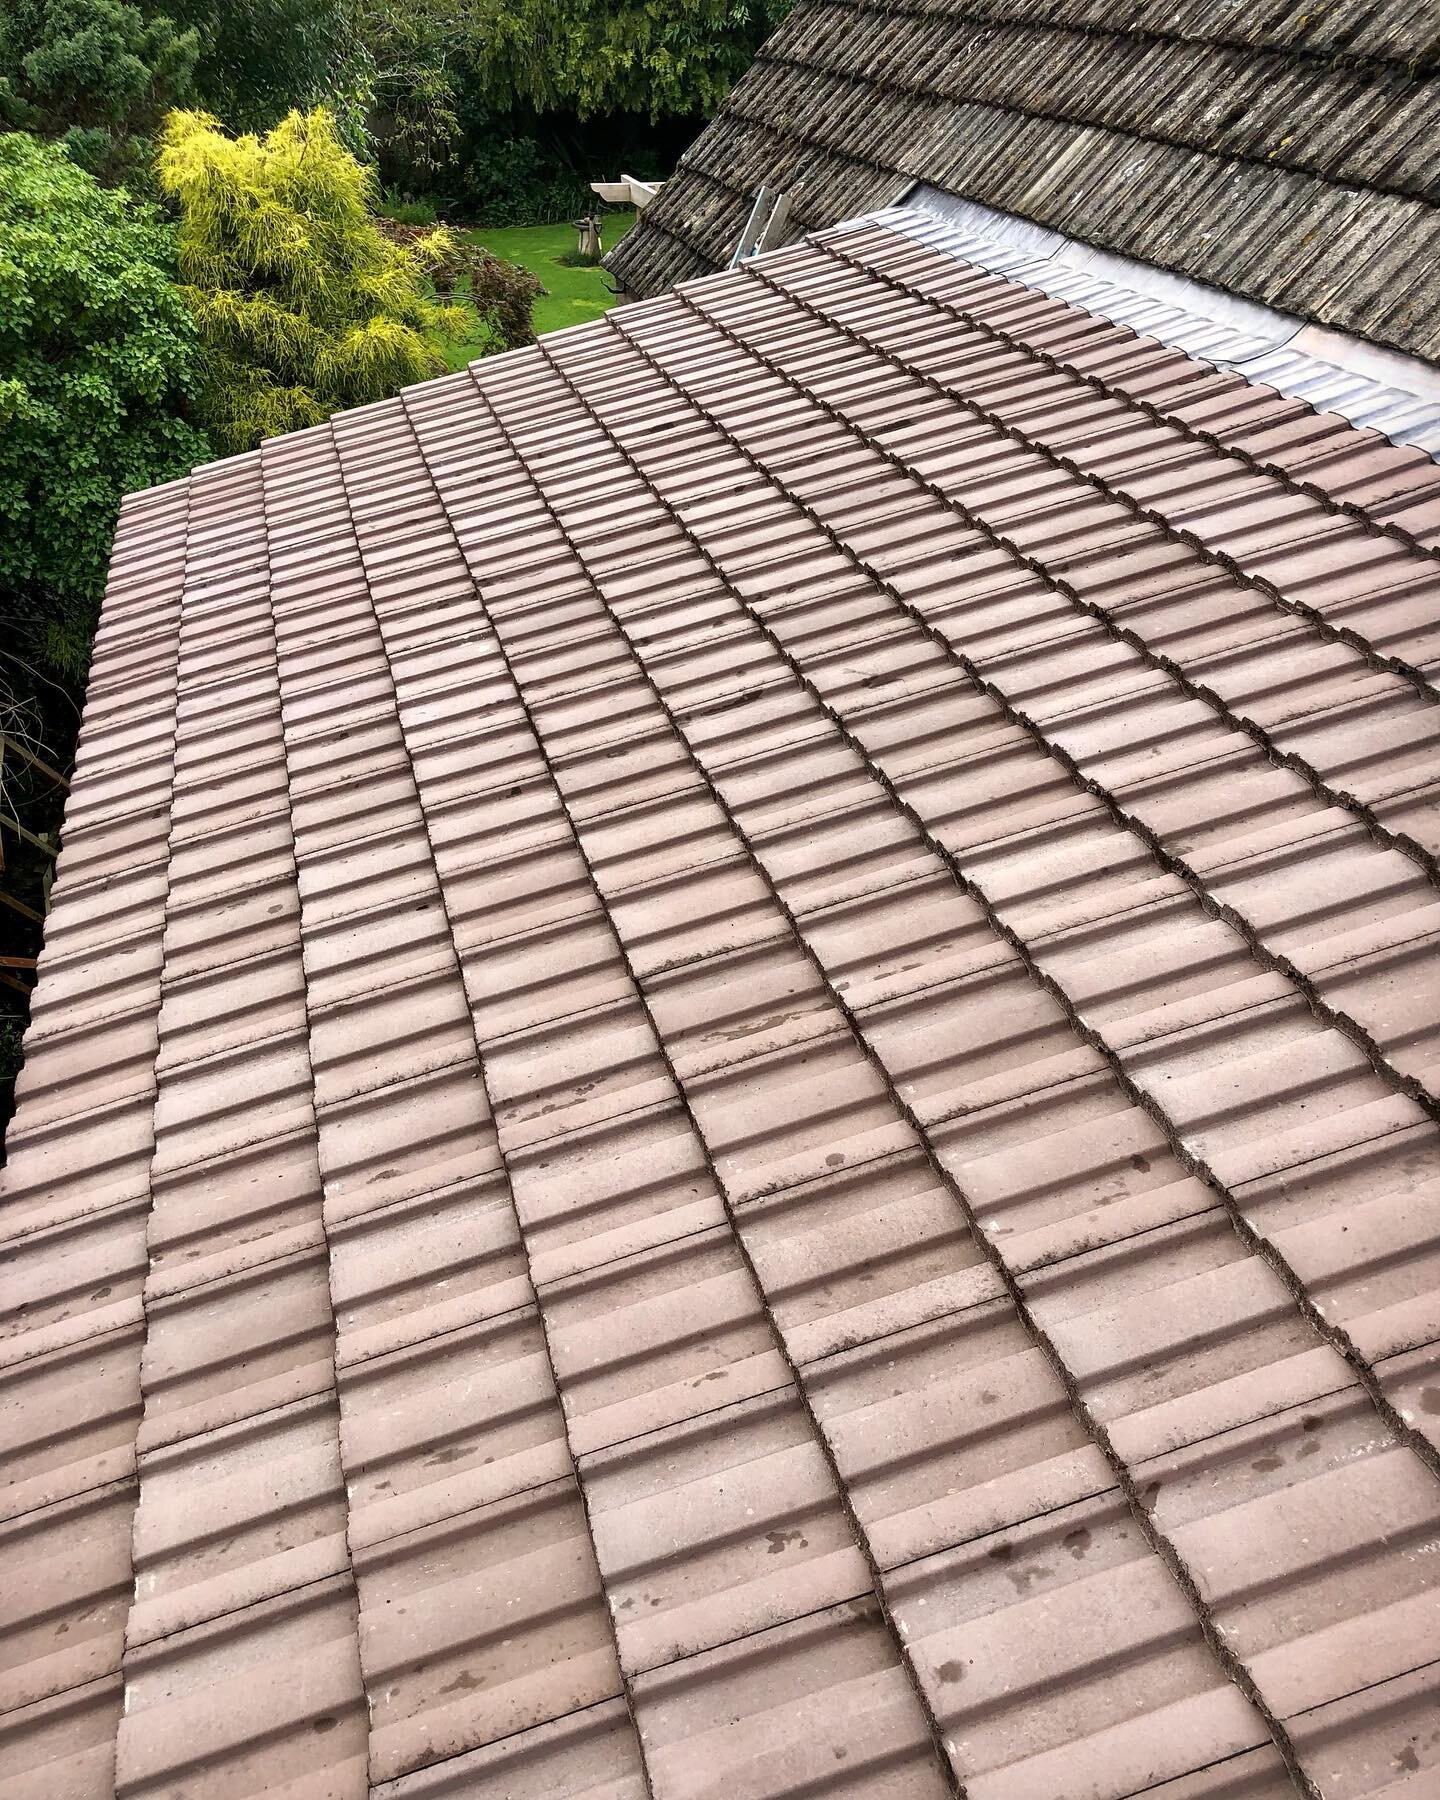 All tiled and flashed in 💪🏽 nice to see a roof through instead of just pitching them and leaving. #roofing #roof #lead #leadflashing #leadporn #carpentry #building #extension #leanto #cutroof #devon #sandrcarpentry